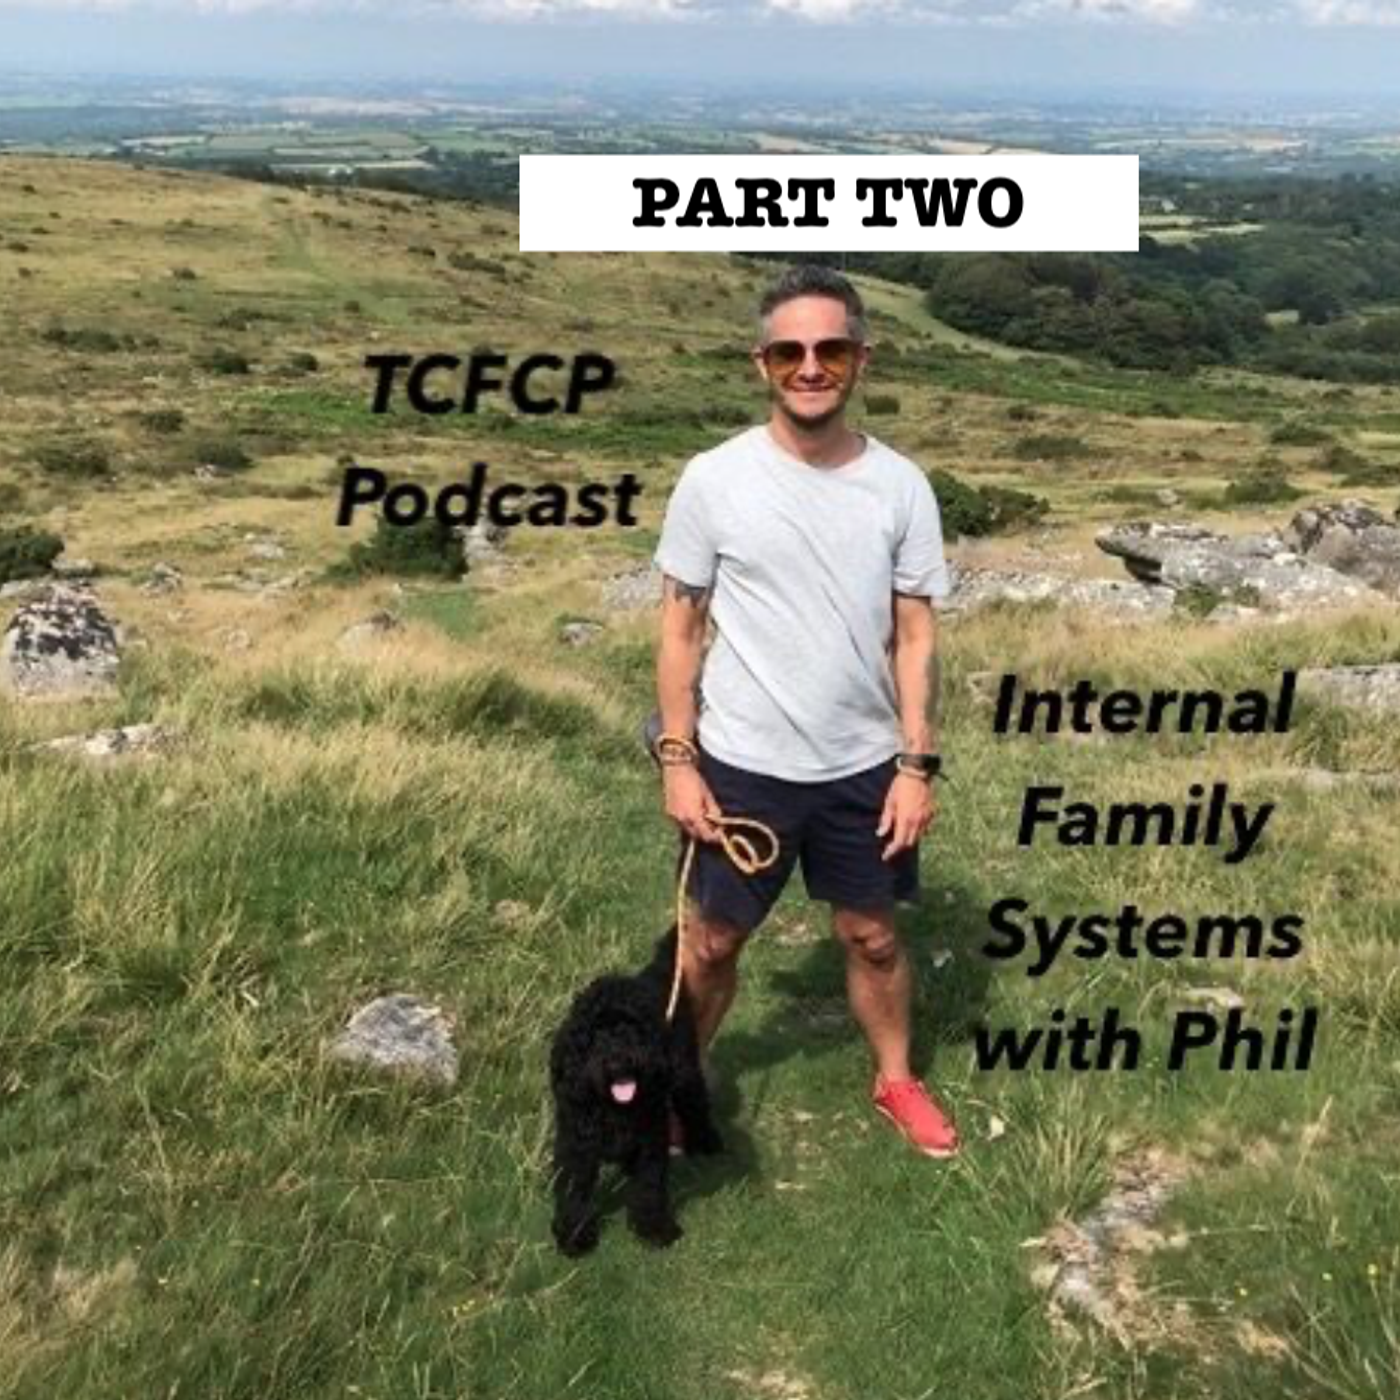 S3 Ep72: Internal Family Systems with Phil PART TWO